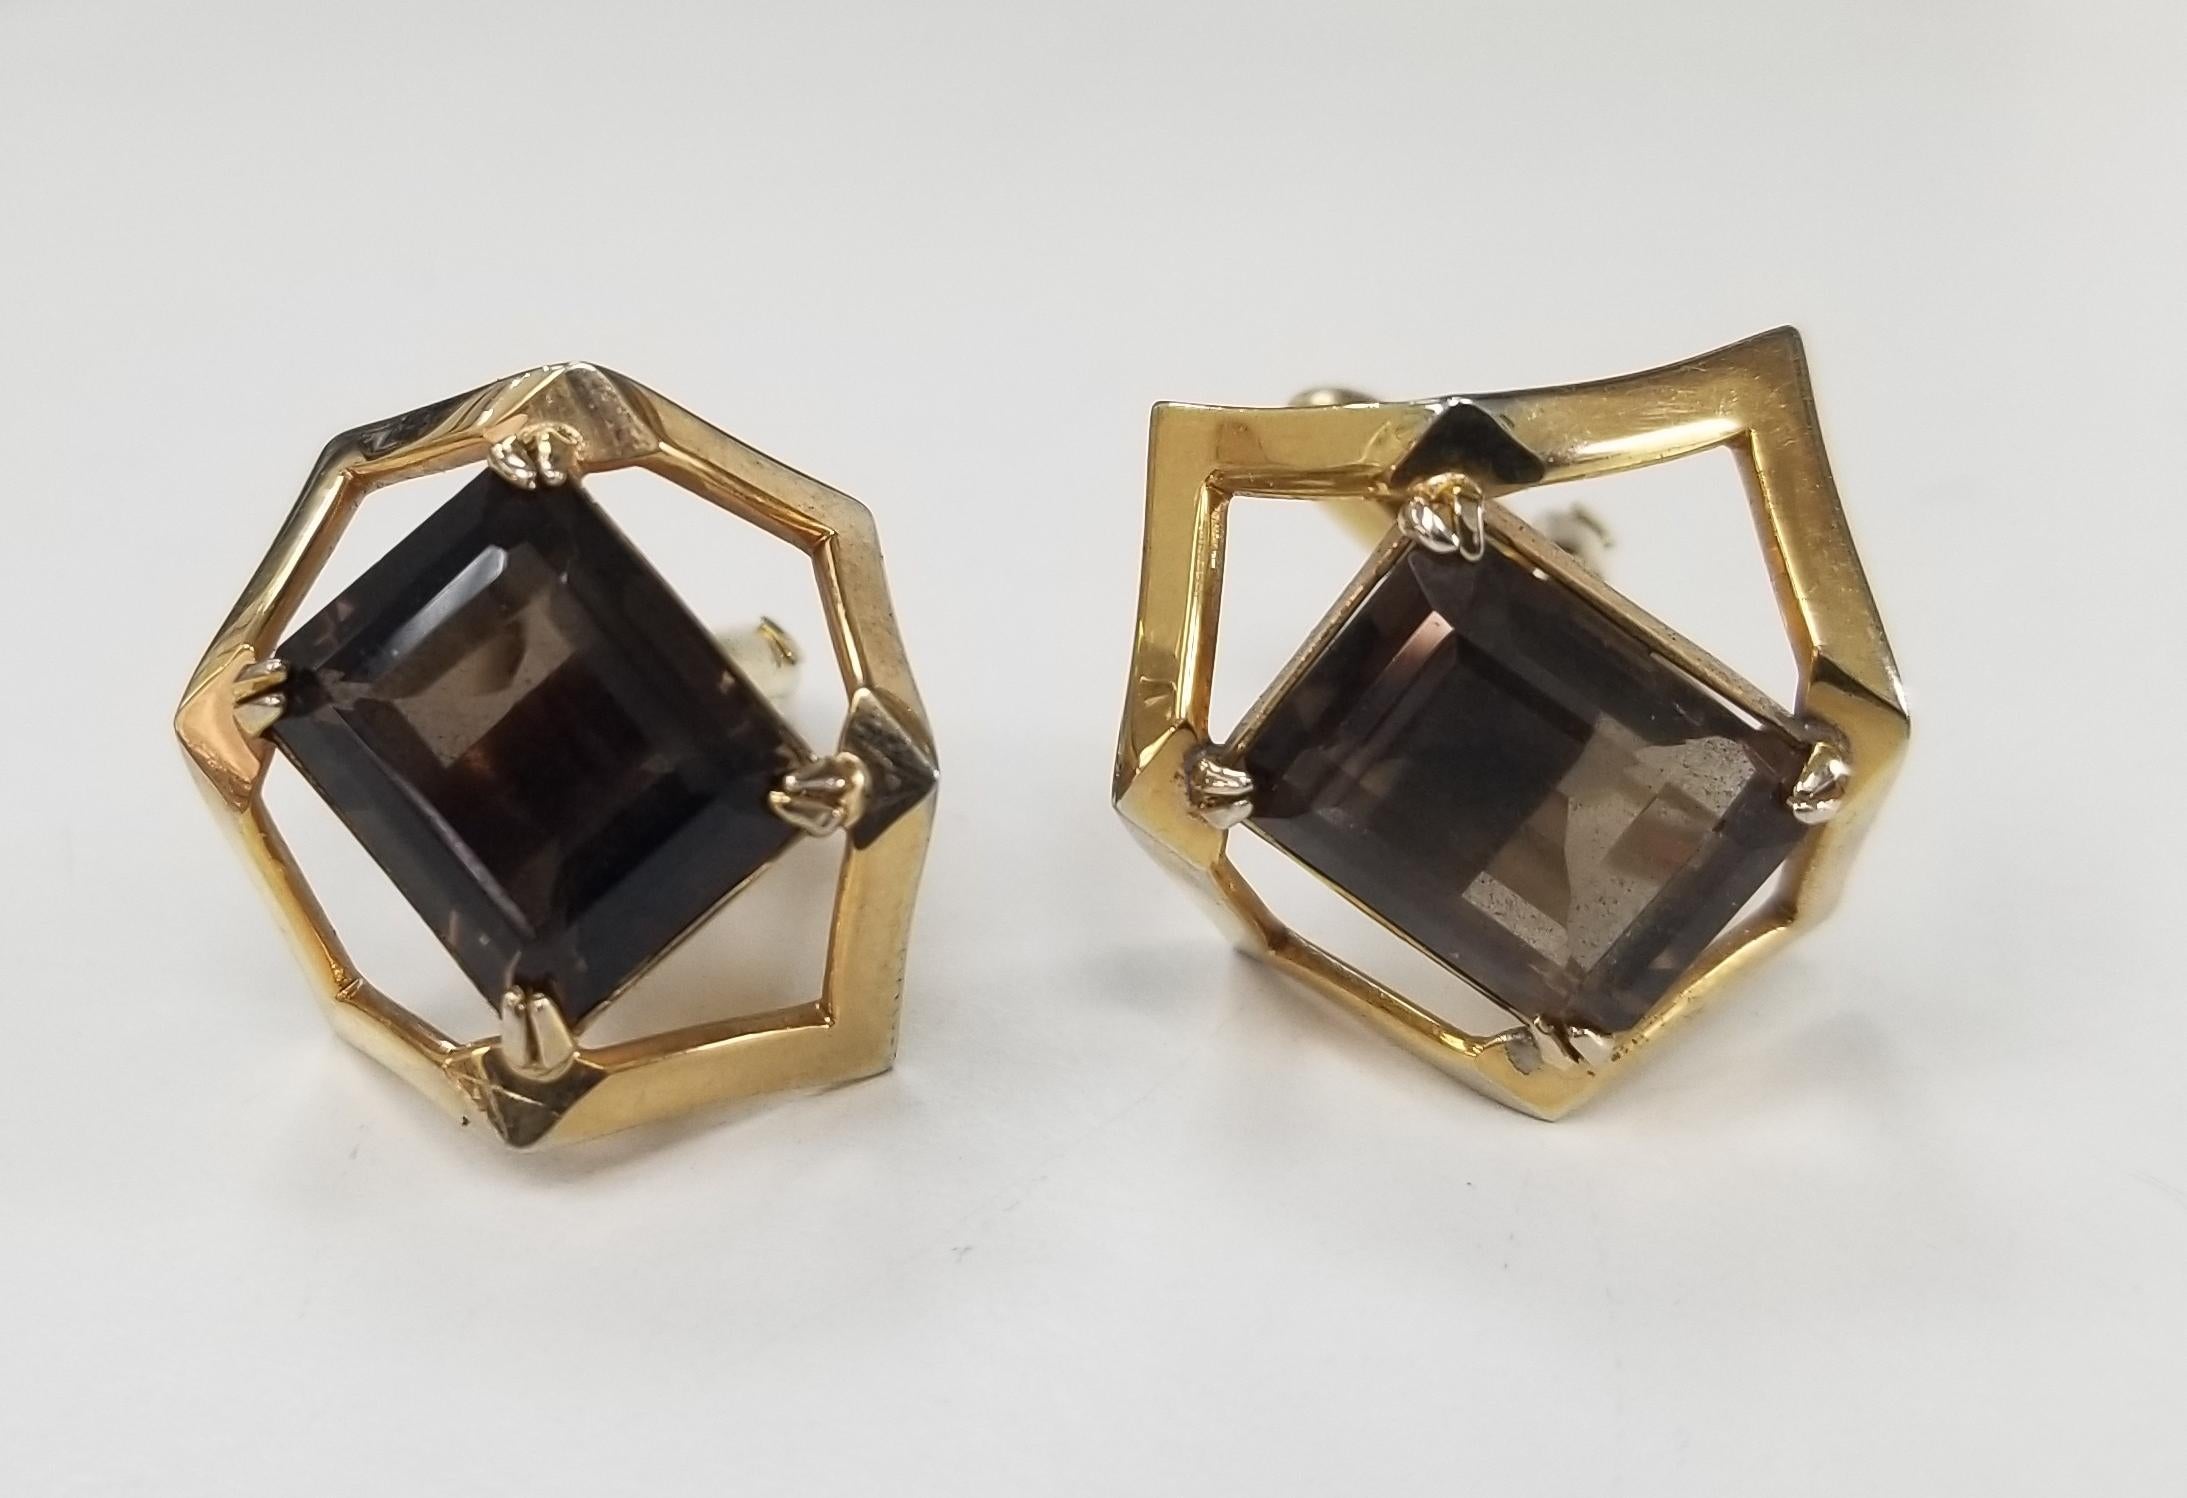 New Old Stock 1970's Swank Cuff links. Features the beautiful smokey quartz in a gold tone setting and metal gold tone.
Perfect for the hot, vintage loving dude in your life! There are absolute attention grabbers because of the rare design and